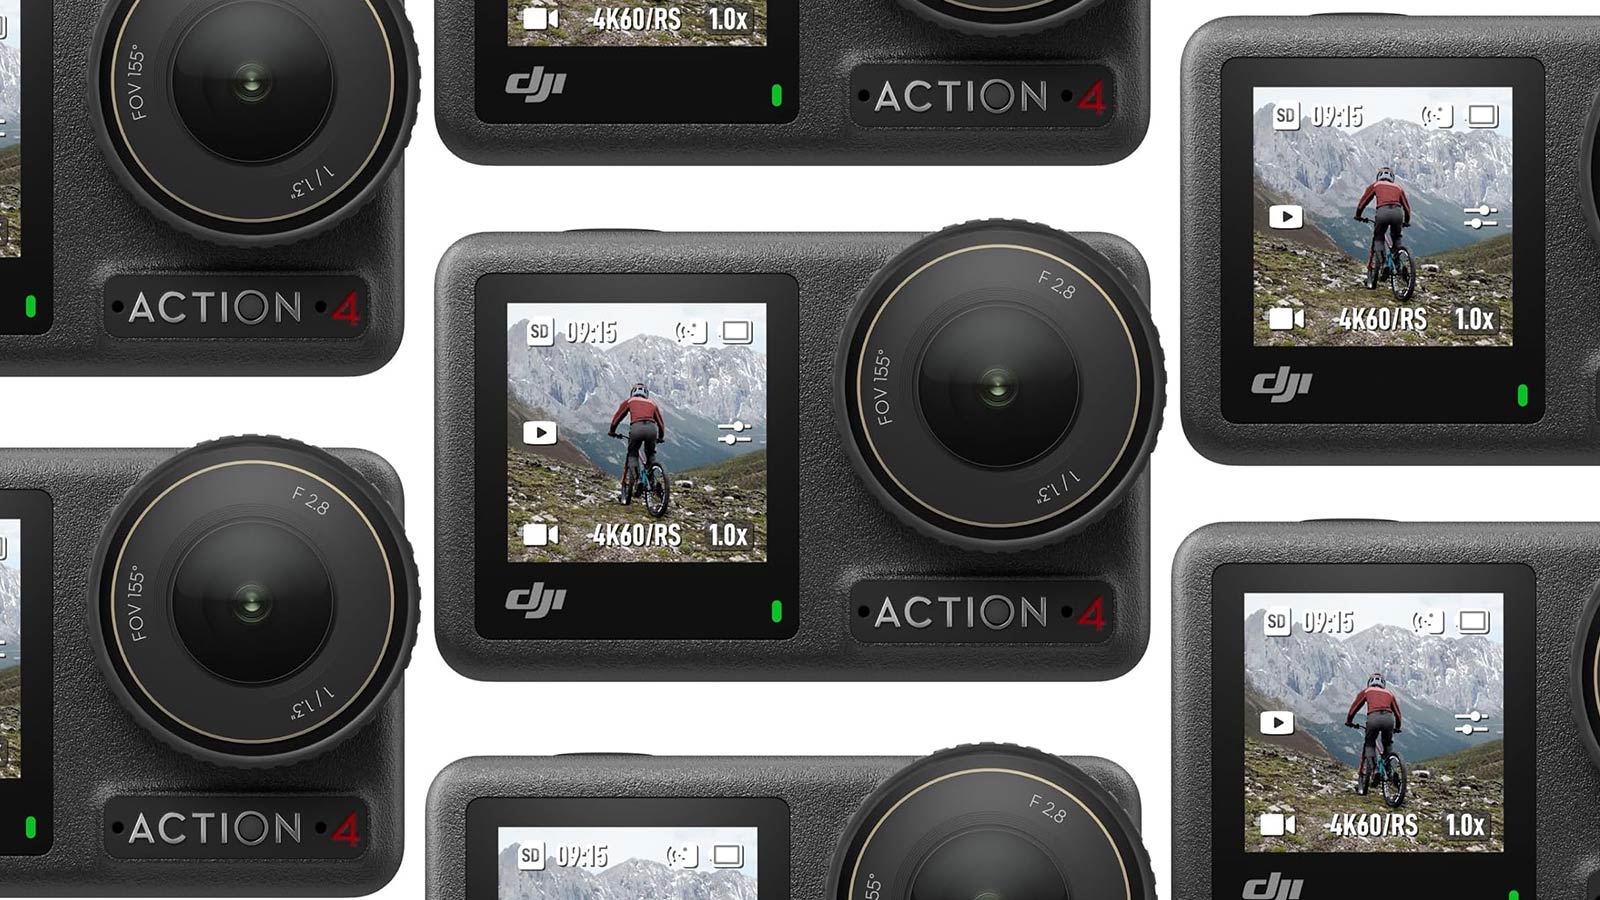 Save $100 and get the DJI Osmo Action 4 camera for its cheapest